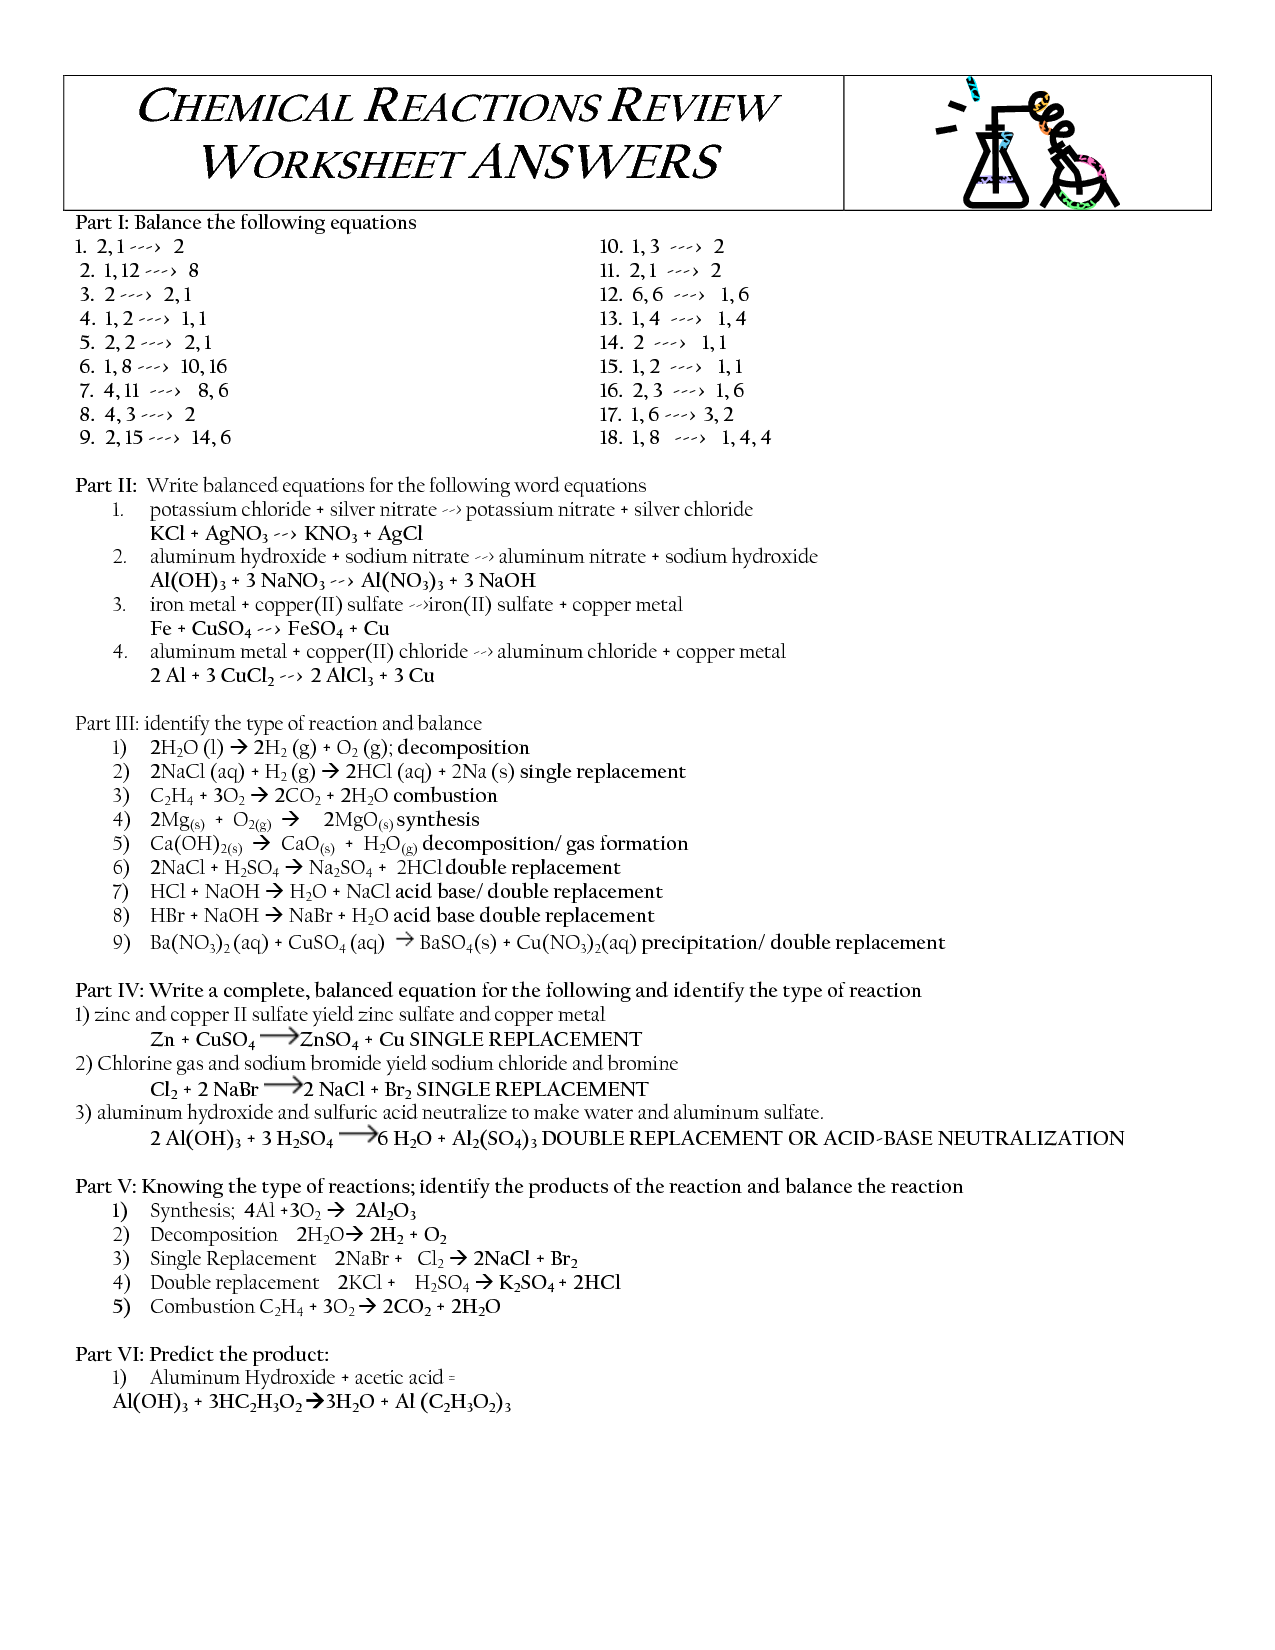 12 Best Images of Physical And Chemical Reactions Worksheet  Physical and Chemical Change 